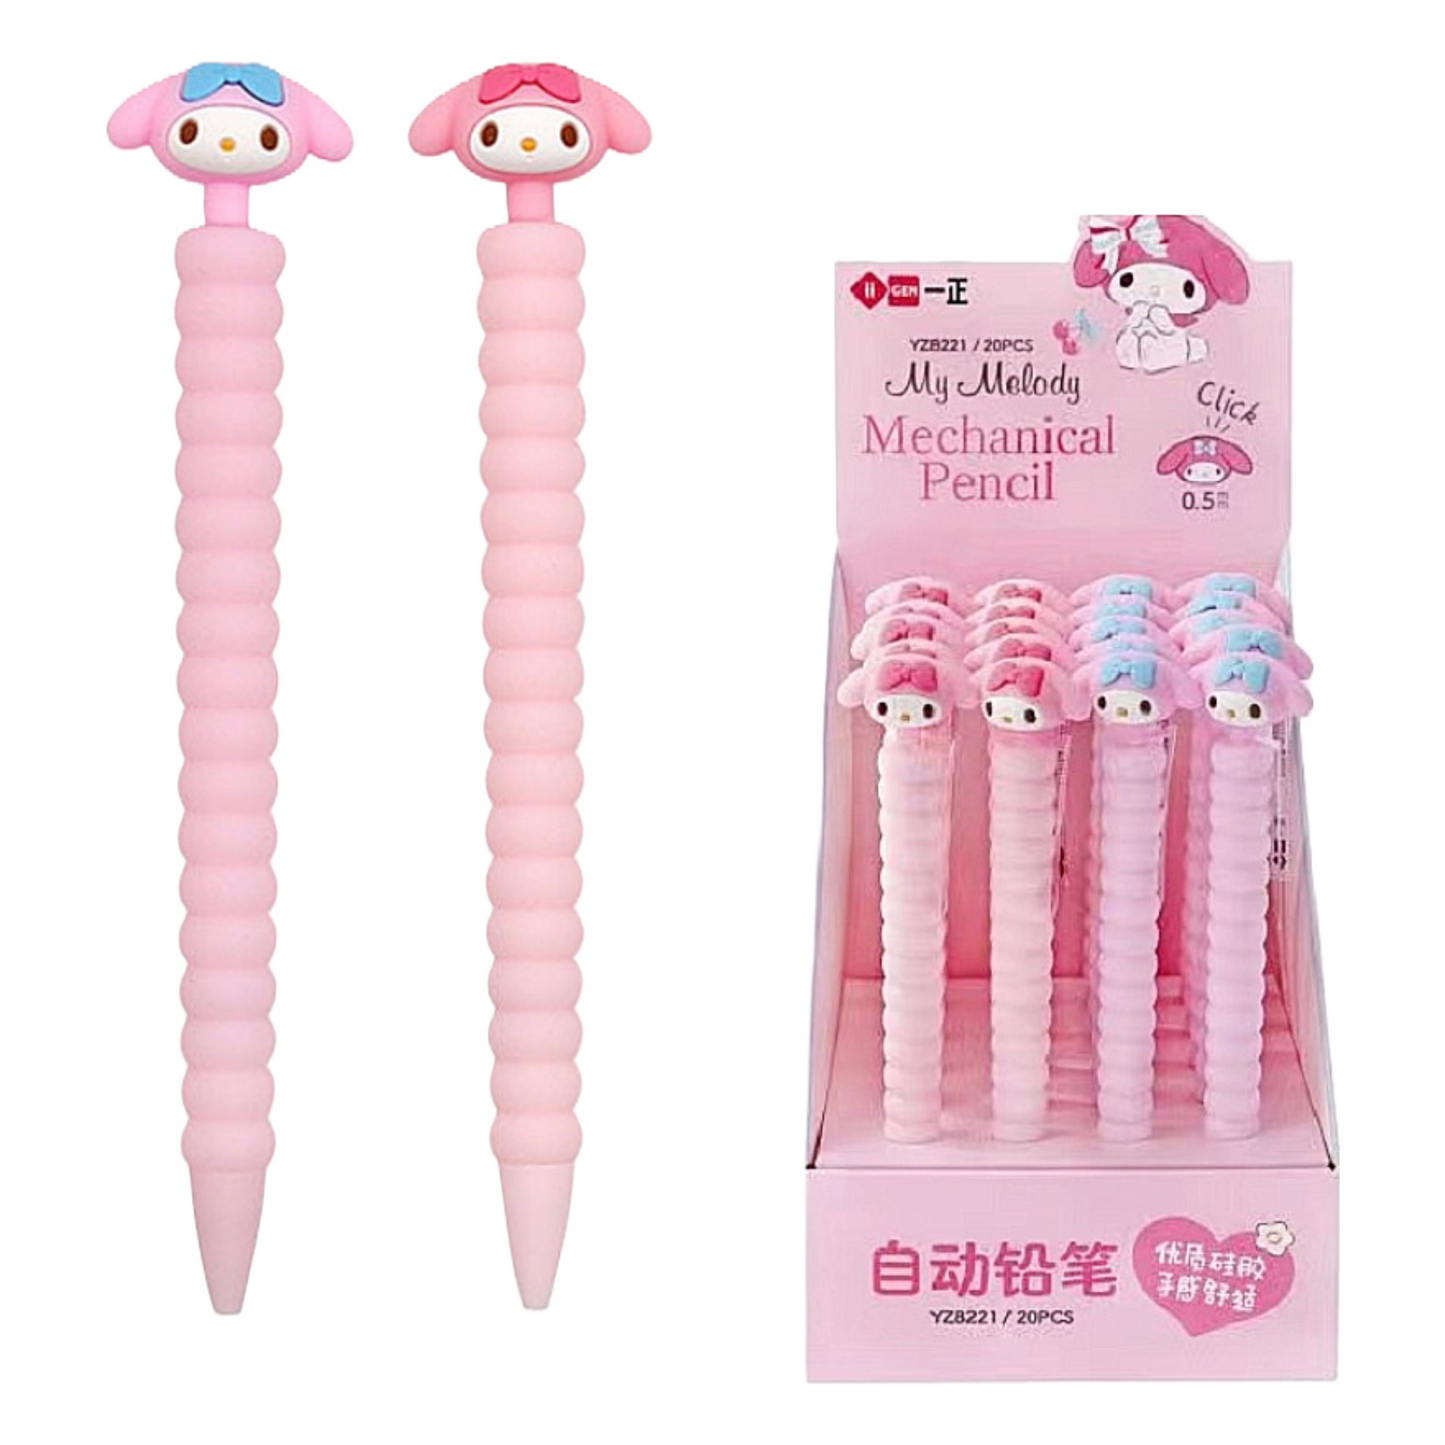 MY MELODY MECHANICAL PENCIL 0.5MM